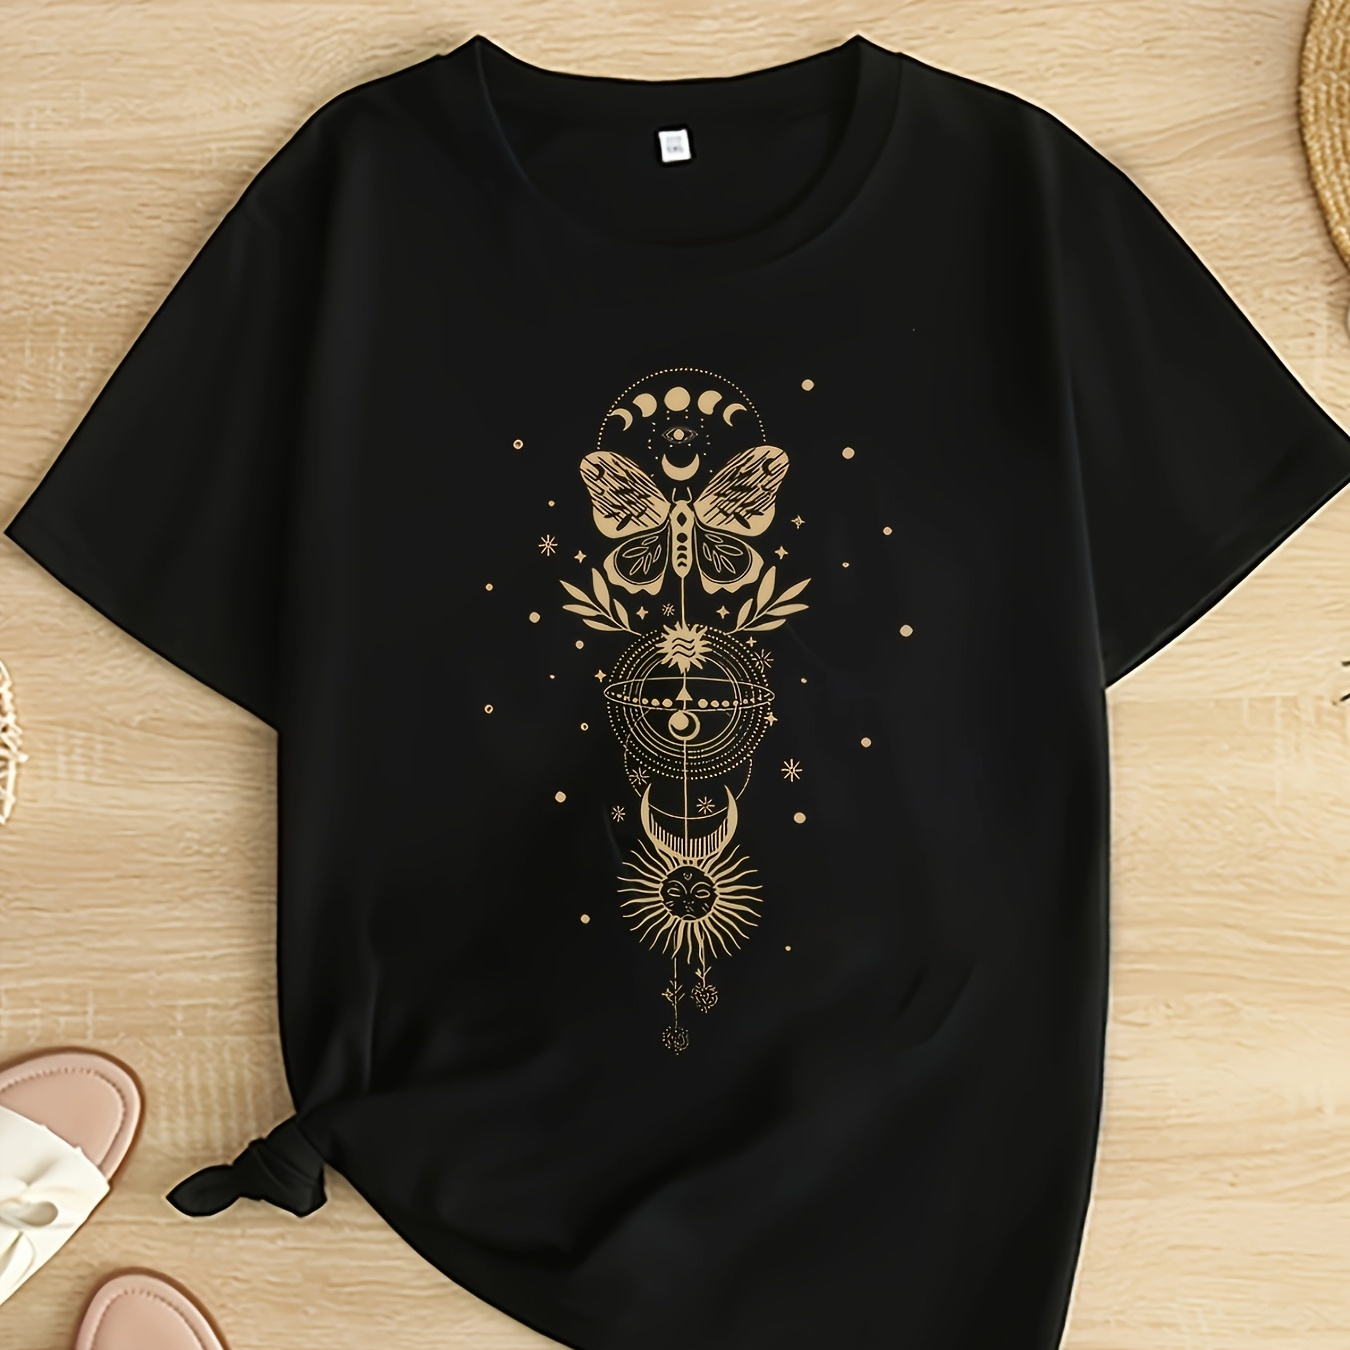 

Plus Size Graphic Print T-shirt, Casual Crew Neck Short Sleeve Top For Spring & Summer, Women's Plus Size Clothing